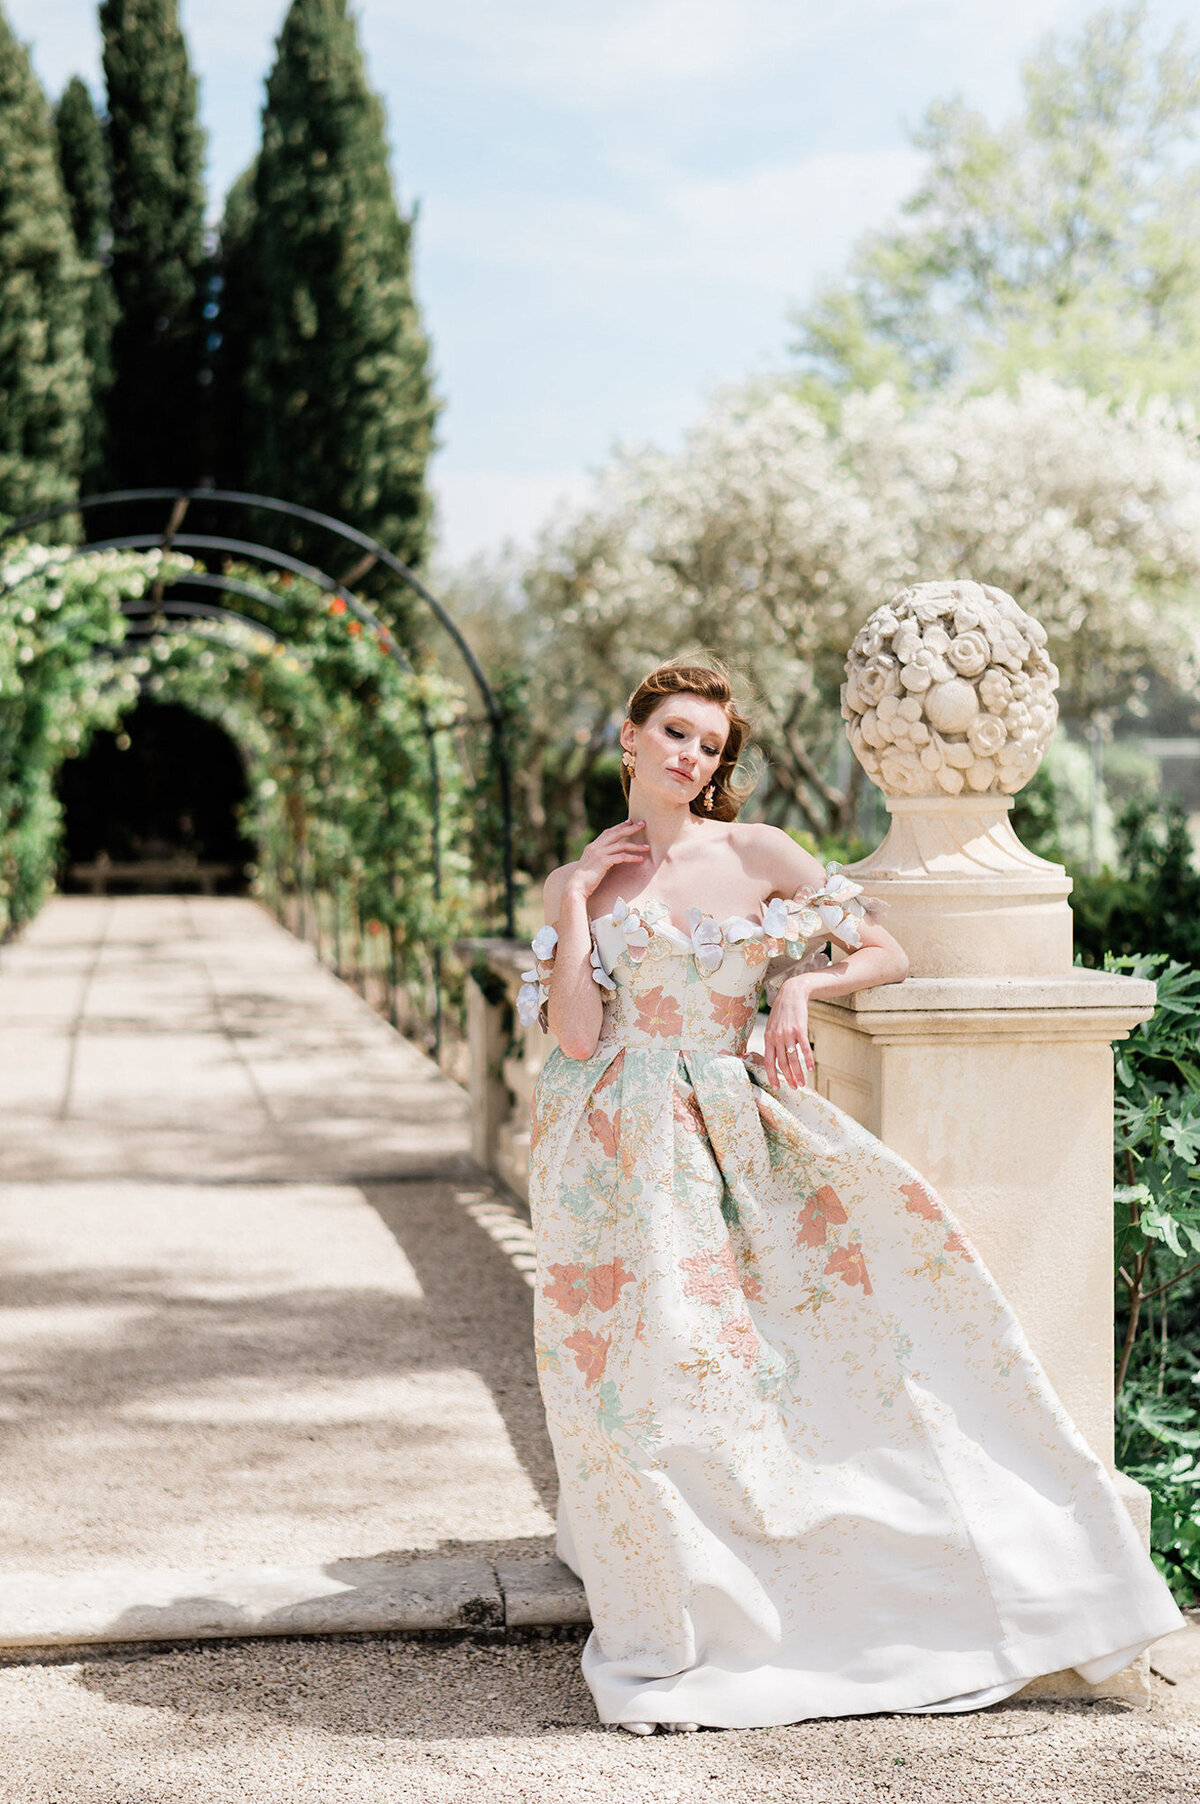 Elevate your wedding memories with the finesse of our luxury destination photography. Our fine art approach in the South of France transforms your special day into a visual narrative, showcasing both genuine emotions and curated elegance at Château de Tourreau.